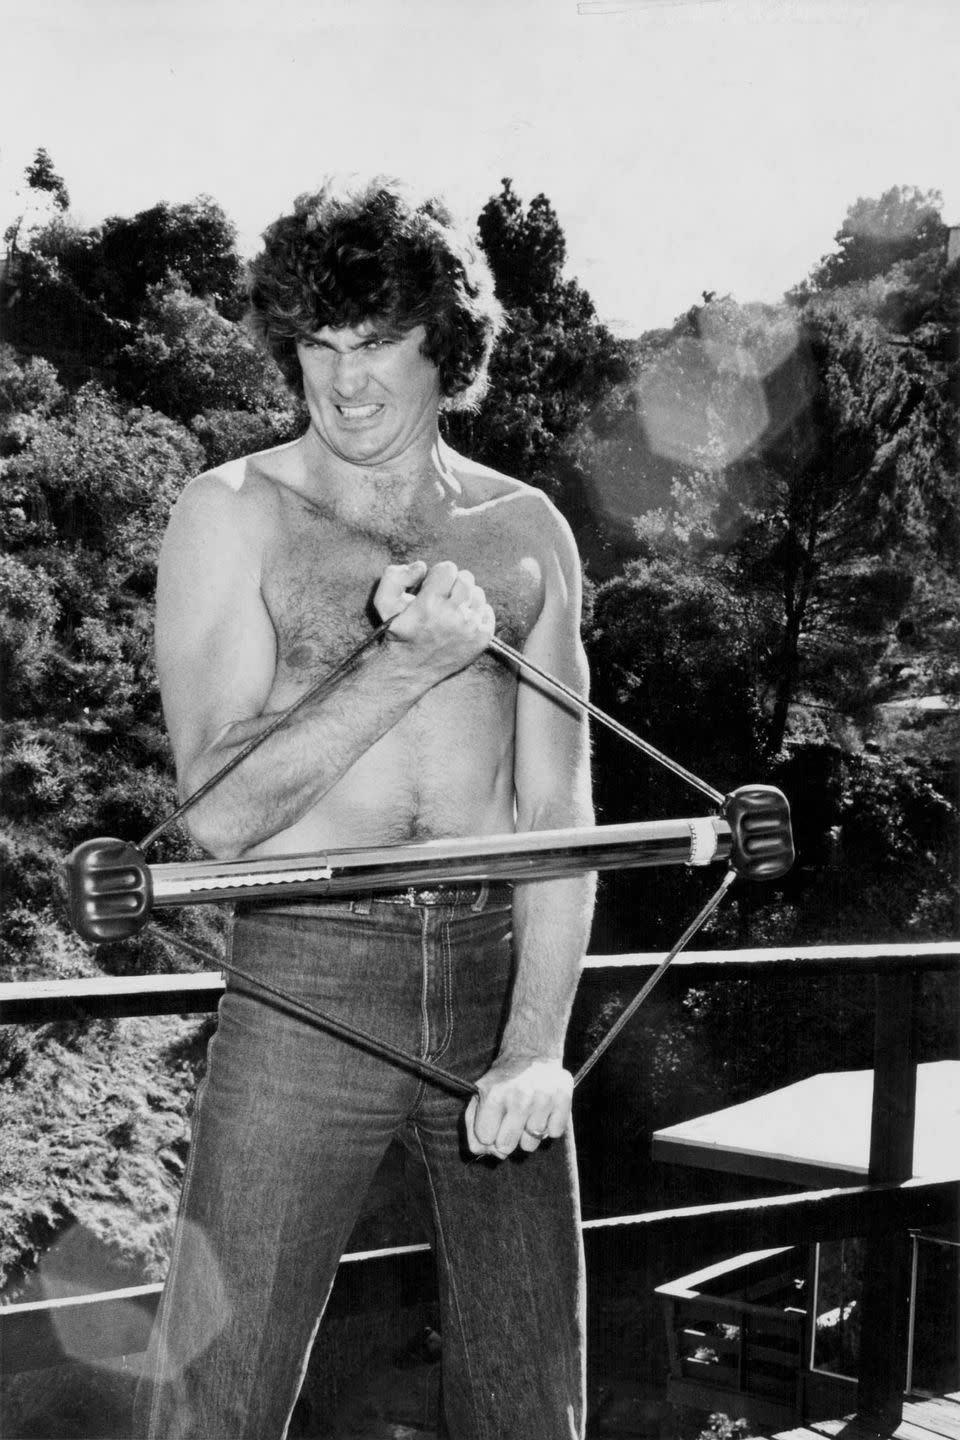 <p>David Hasselhoff jokingly practicing body building exercises, at his home in the Hollywood Hills in 1979.</p>